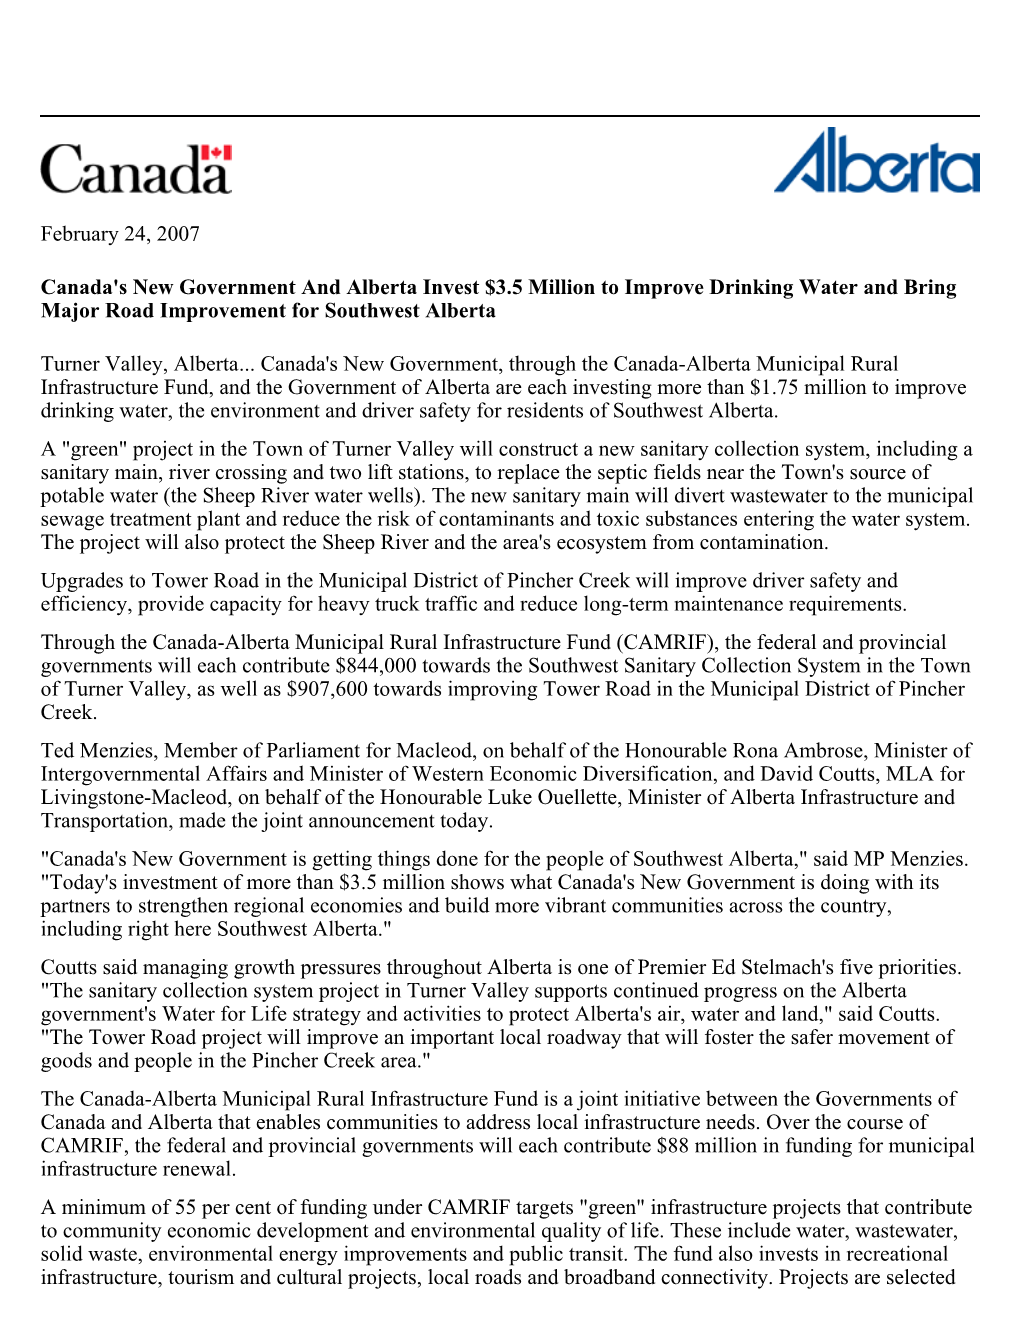 February 24, 2007 Canada's New Government and Alberta Invest